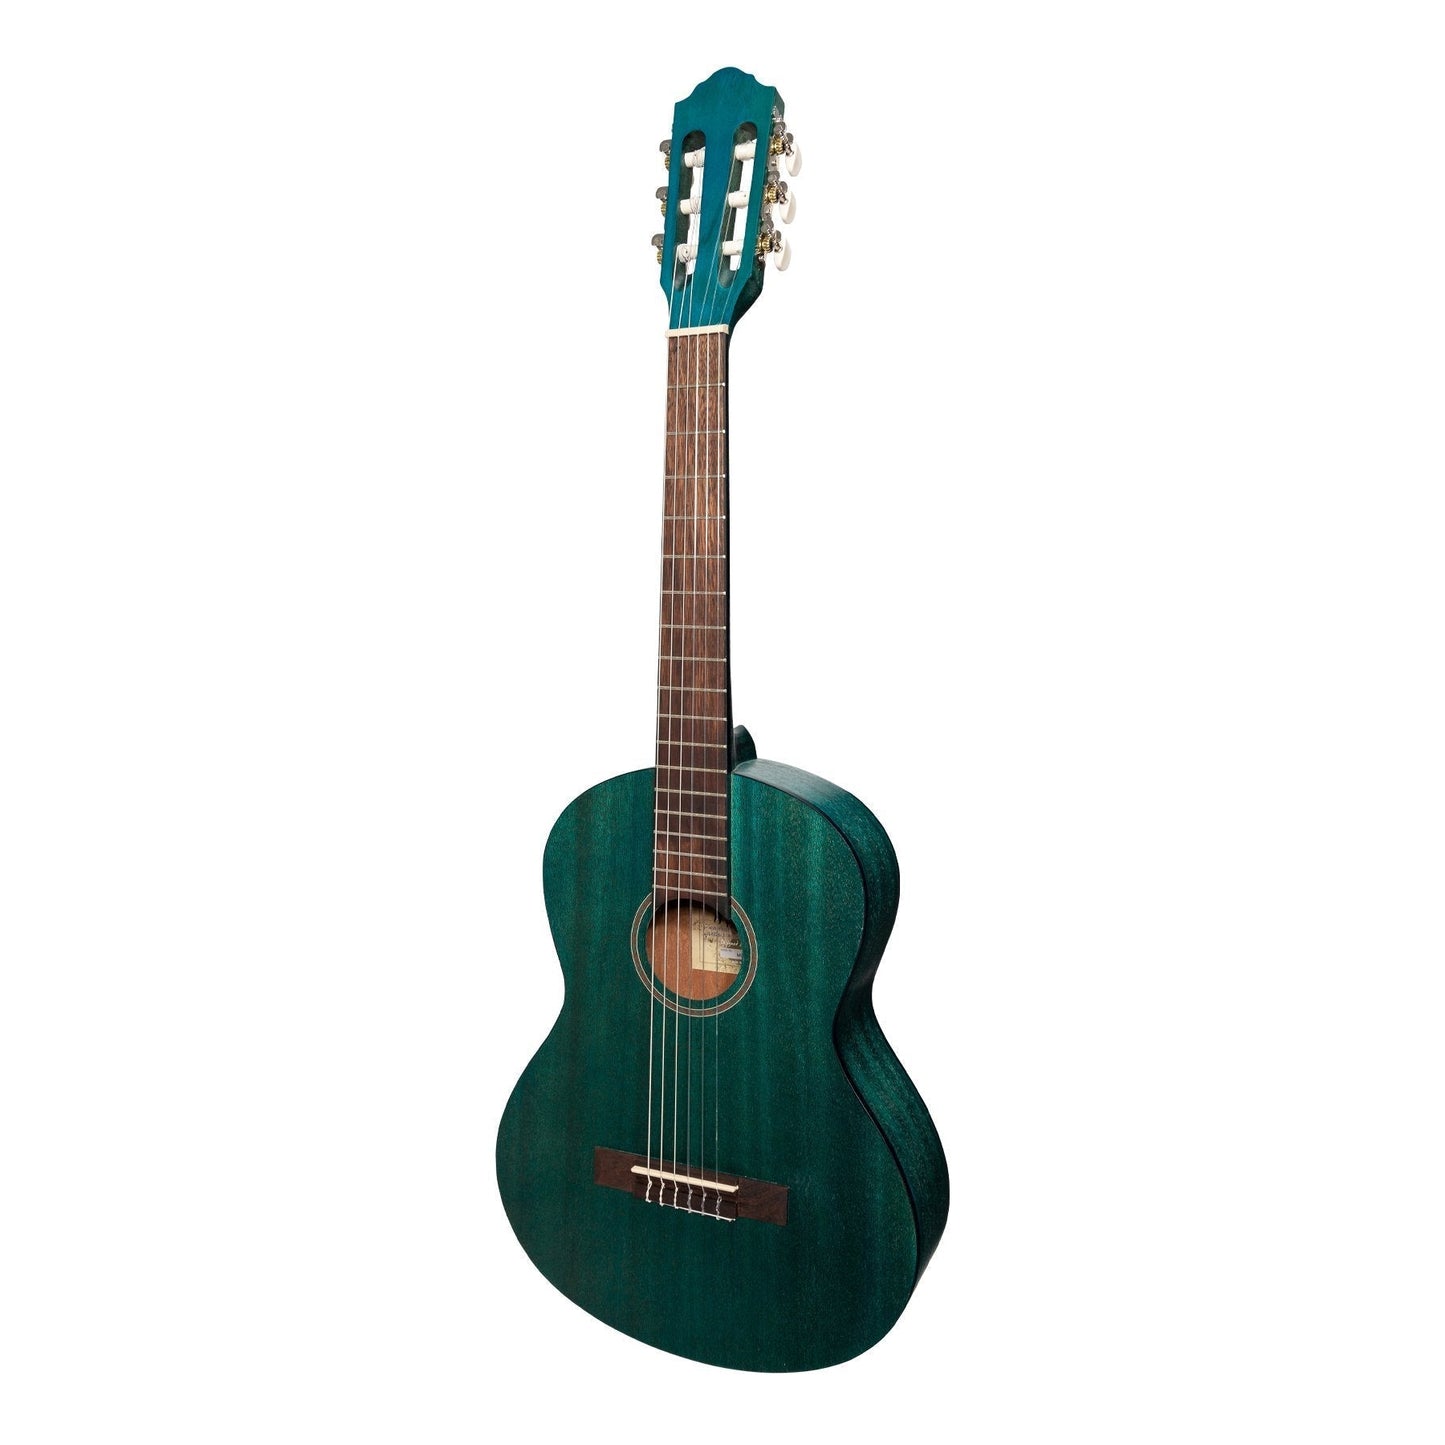 Martinez 'Slim Jim' 3/4 Size Student Classical Guitar Pack with Built In Tuner (Teal Green)